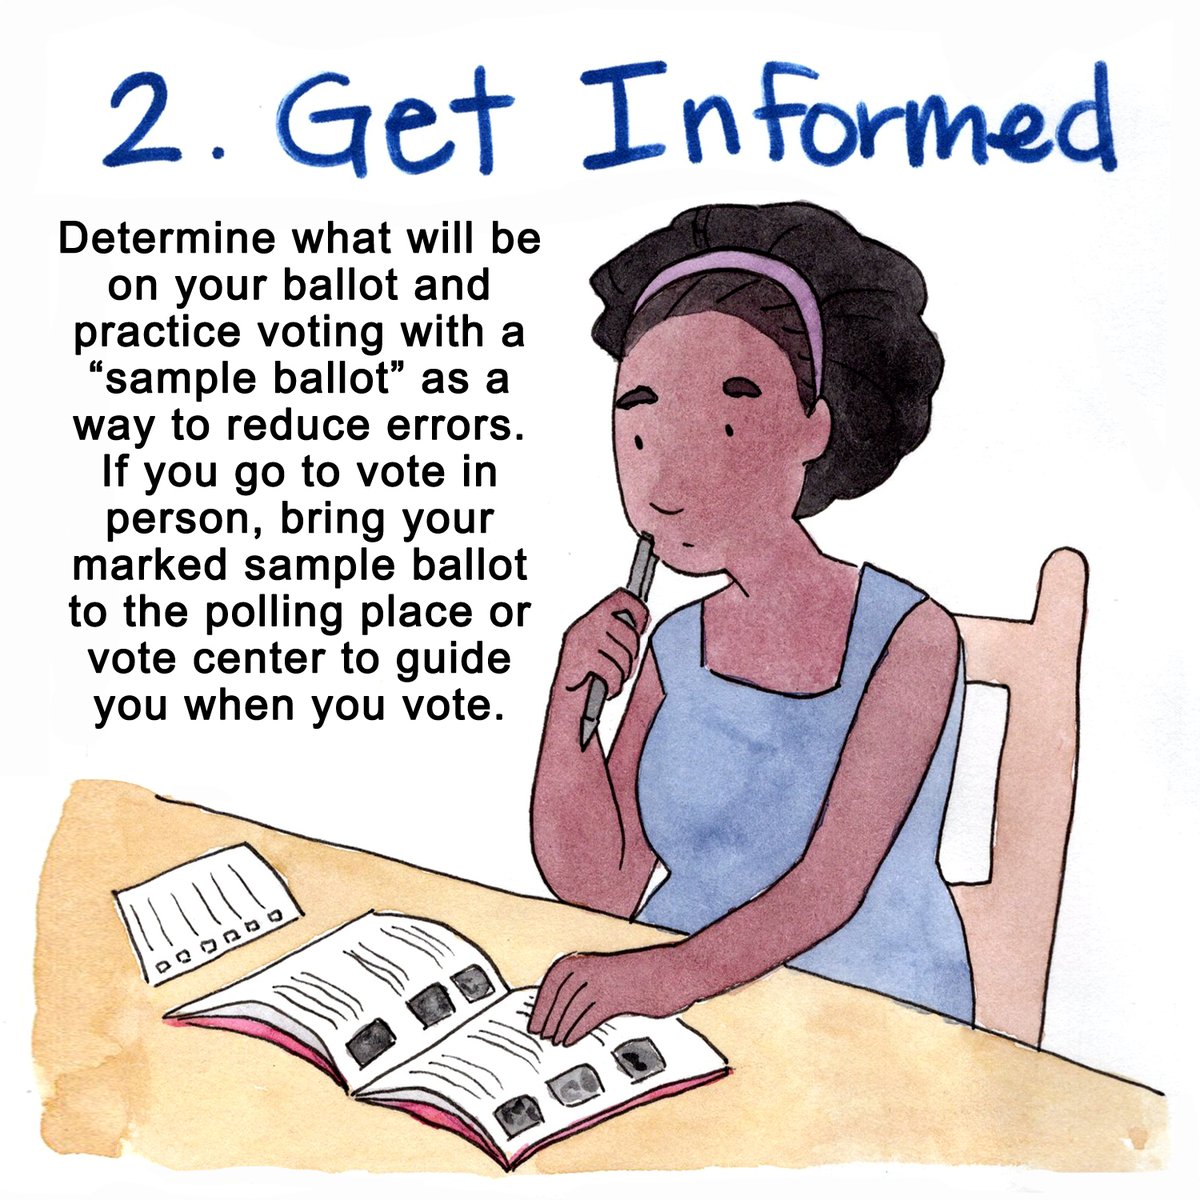 2. GET INFORMEDDetermine what will be on your ballot, and practice voting with a “sample ballot,” as a way to reduce errors. If you goto vote in person, bring your marked sample ballot to the polling place or vote center to guide you when you vote.(5/10)